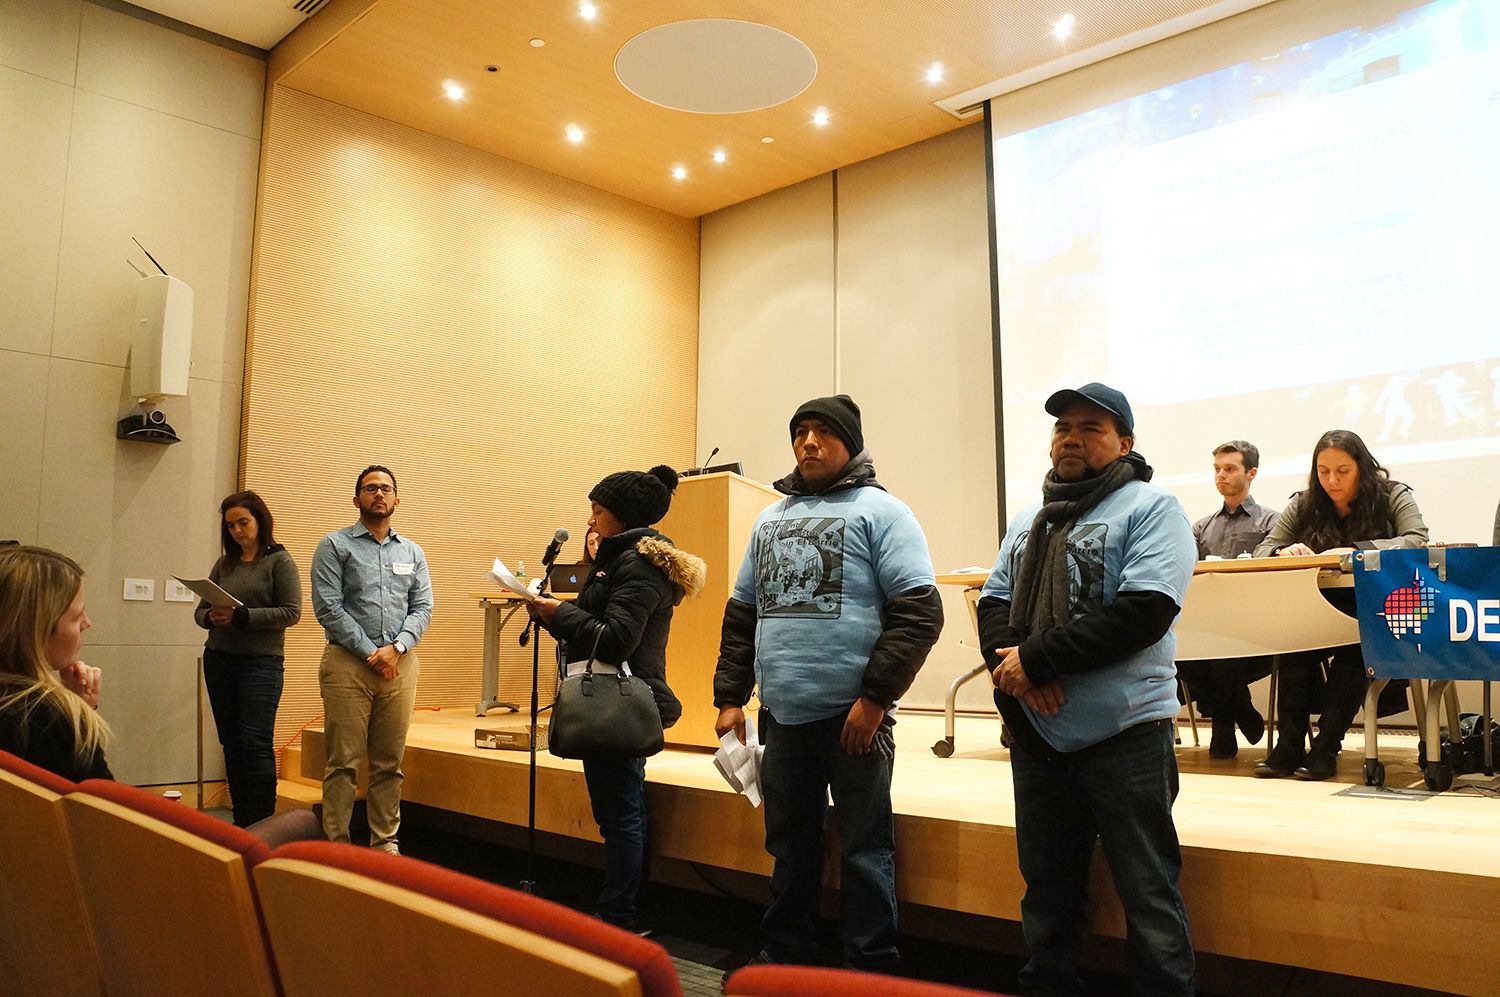 Activists from the Movement for Justice in El Barrio speak at last Thursday's public meeting on the East Harlem rezoning. photo by Rebecca Baird-Remba